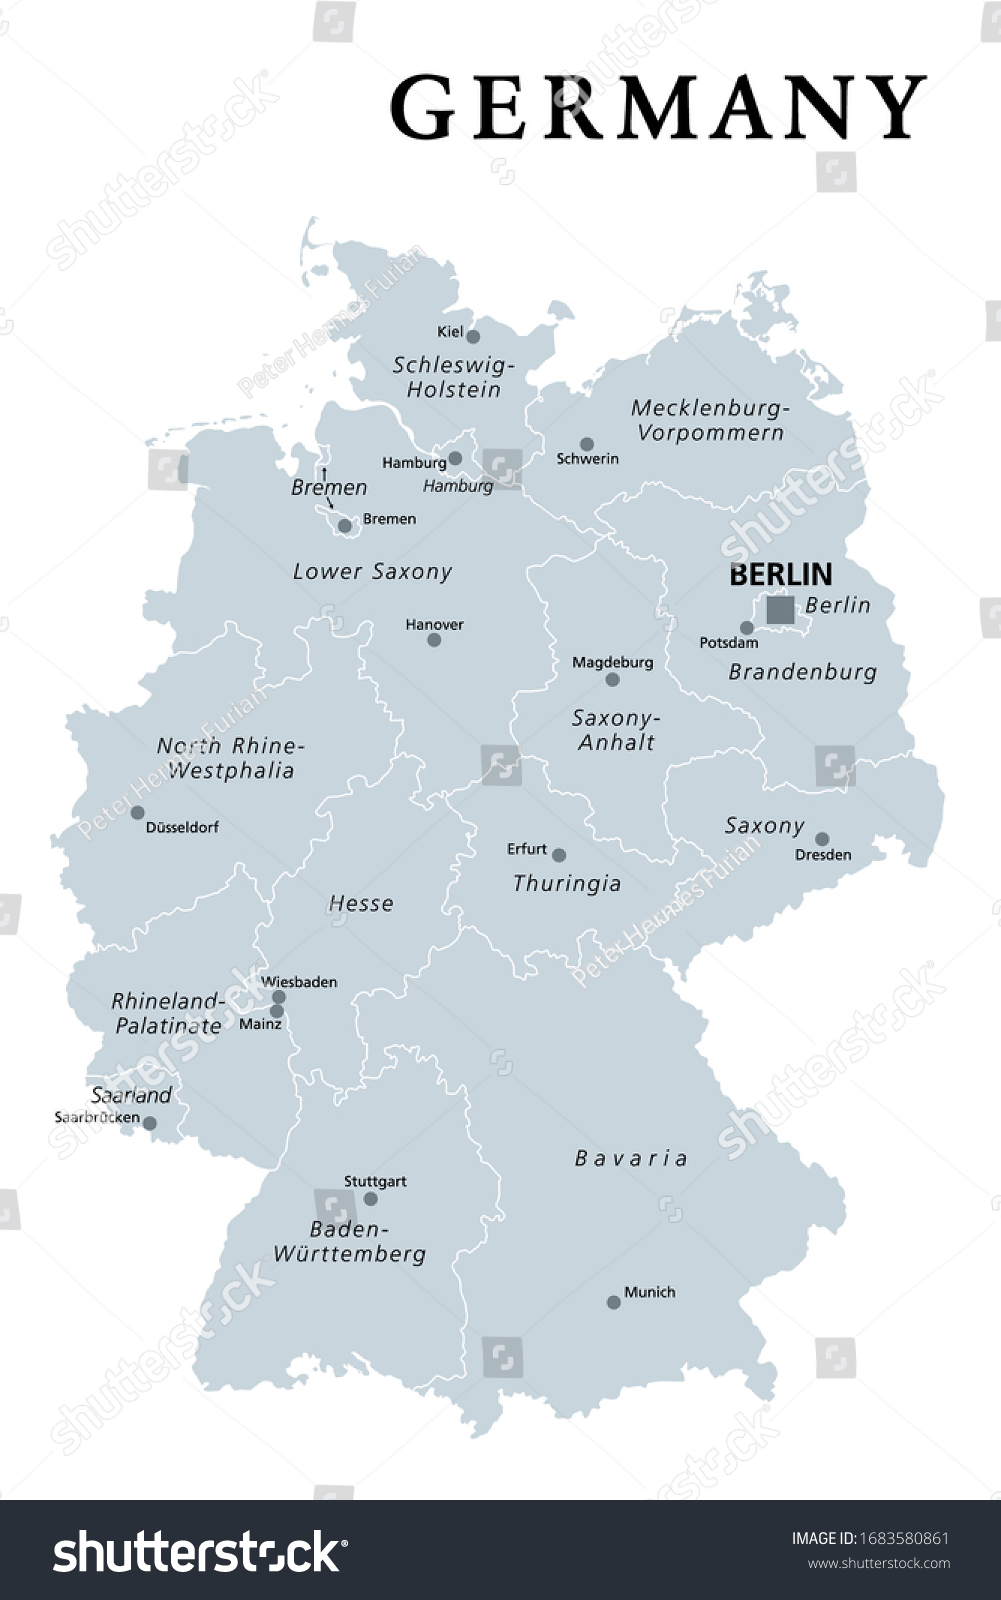 SVG of Germany, gray political map. States of the Federal Republic of Germany with capital Berlin and 16 partly-sovereign states. Country in Central and Western Europe. English labeling. Illustration. Vector svg